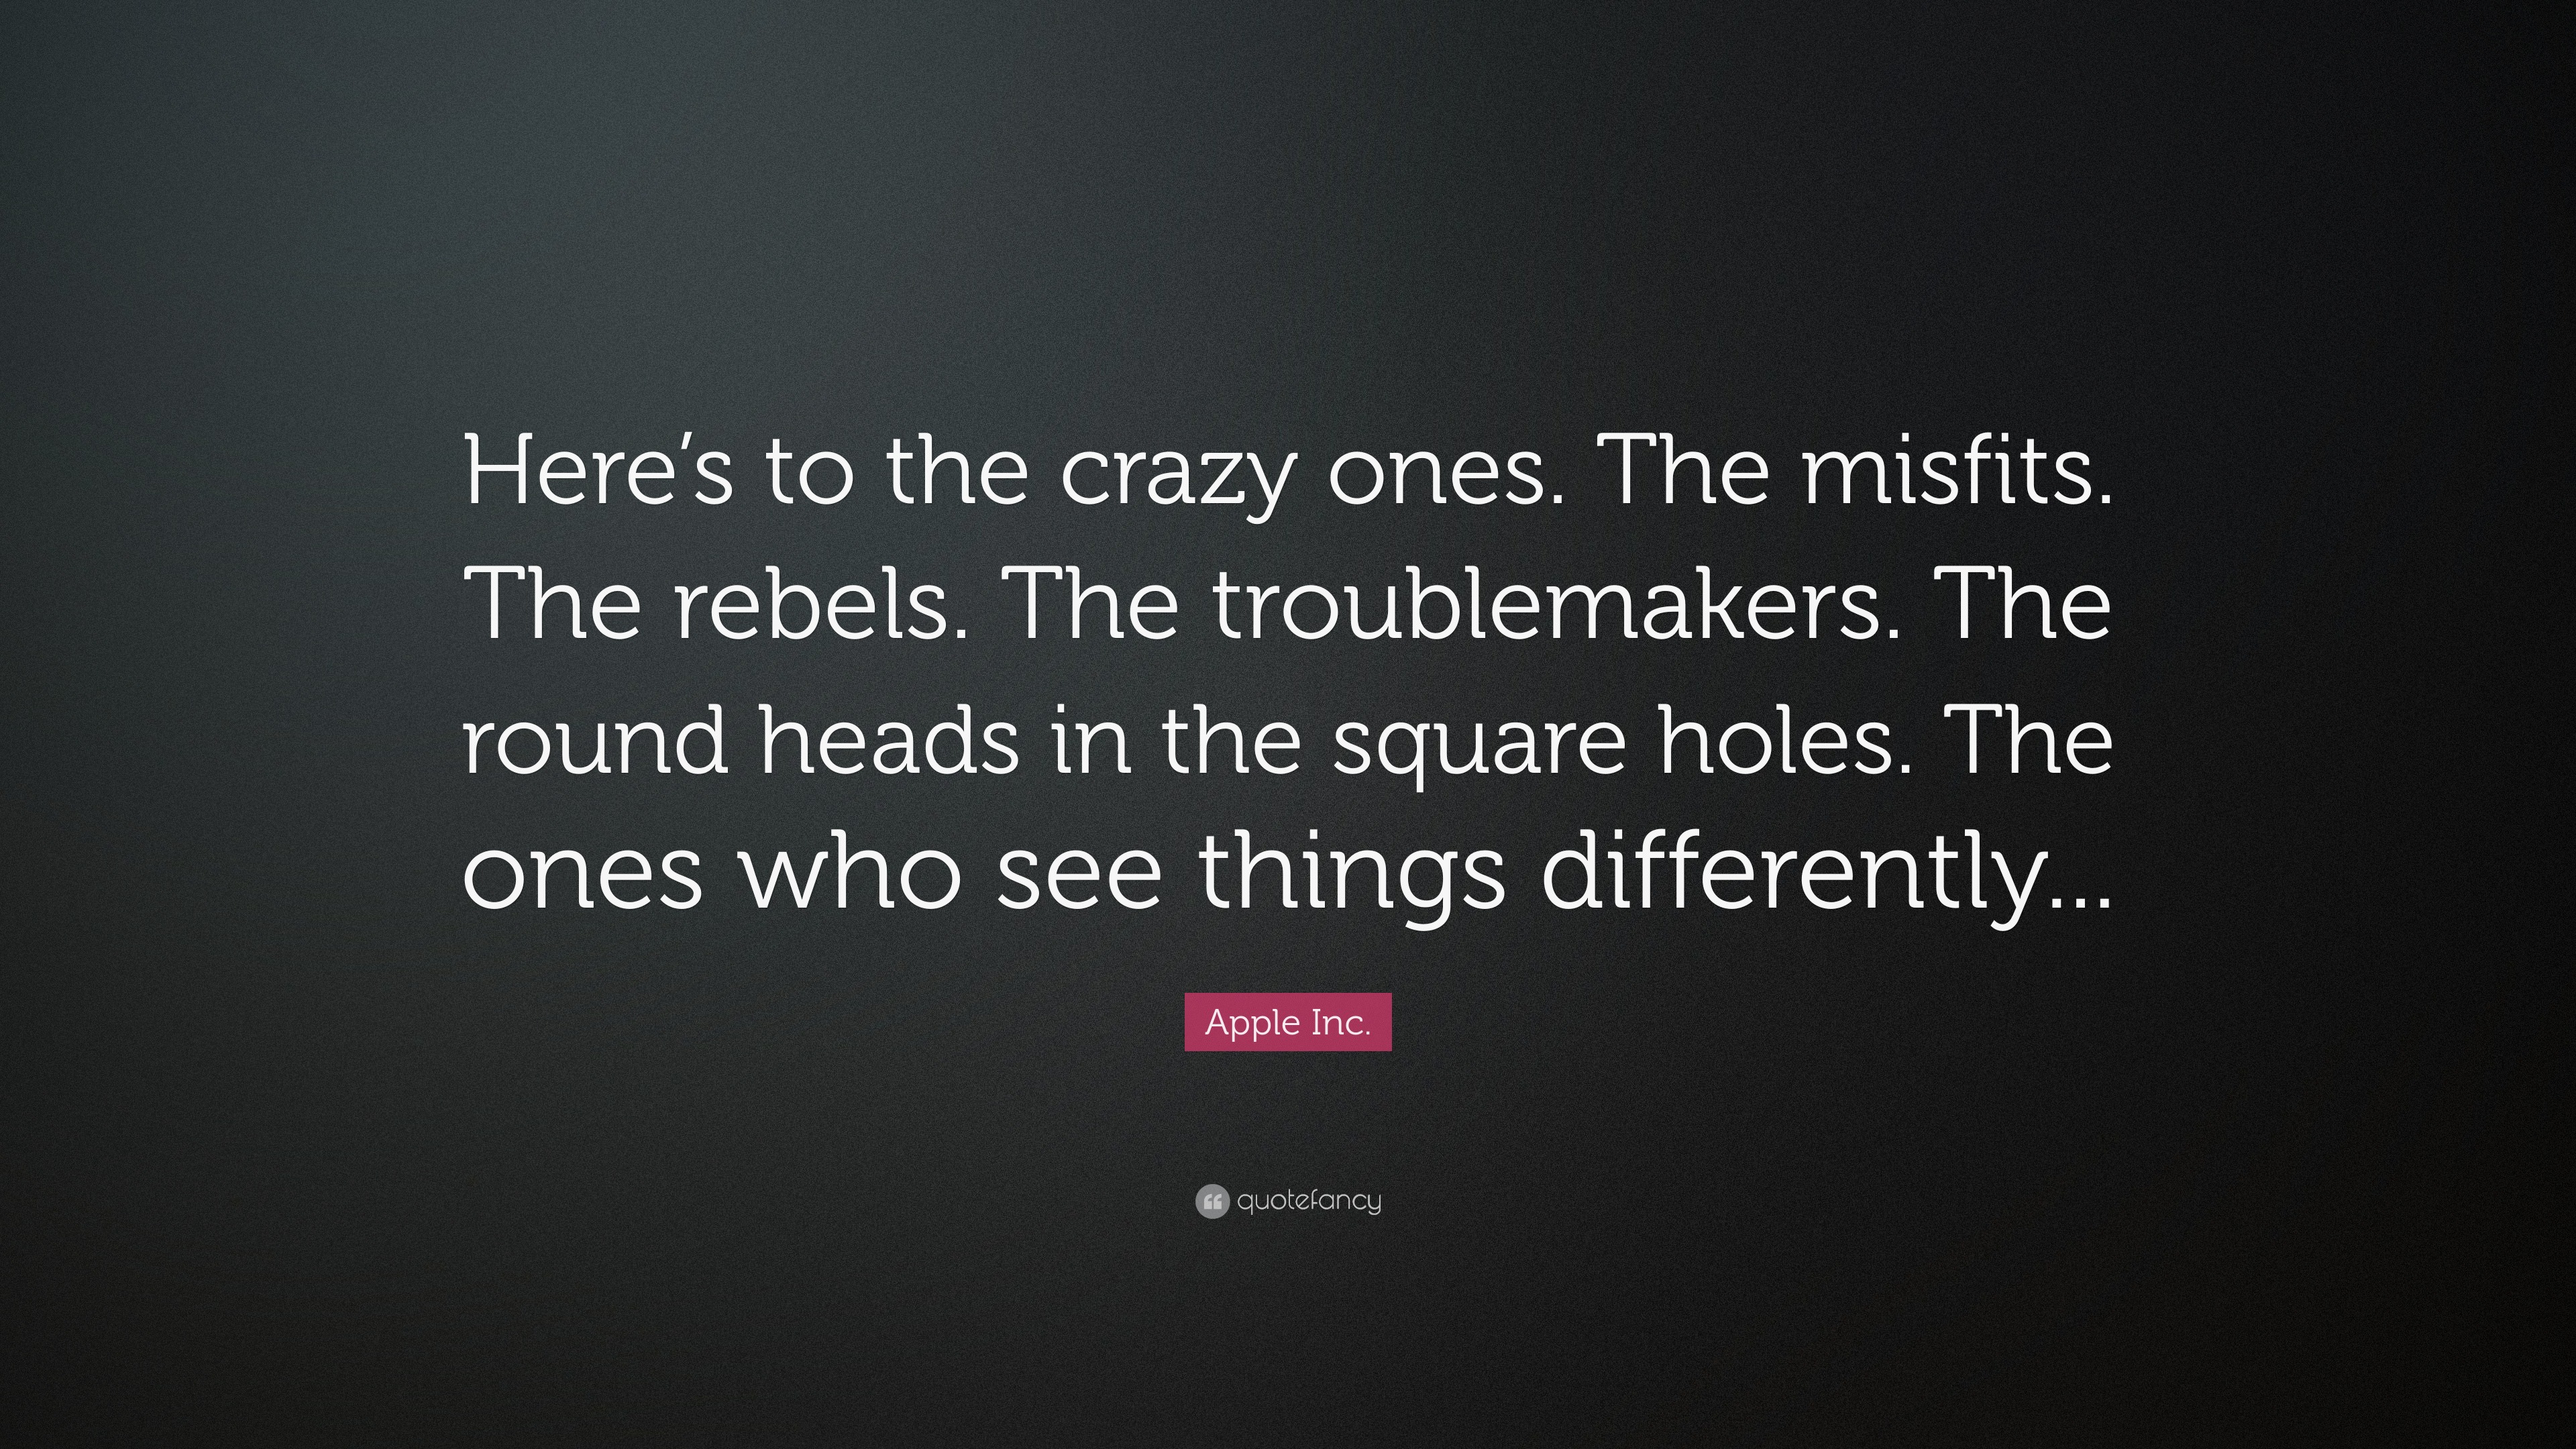 Apple Inc Quote Here S To The Crazy Ones The Misfits The Rebels The Troublemakers The Round Heads In The Square Holes The Ones Who